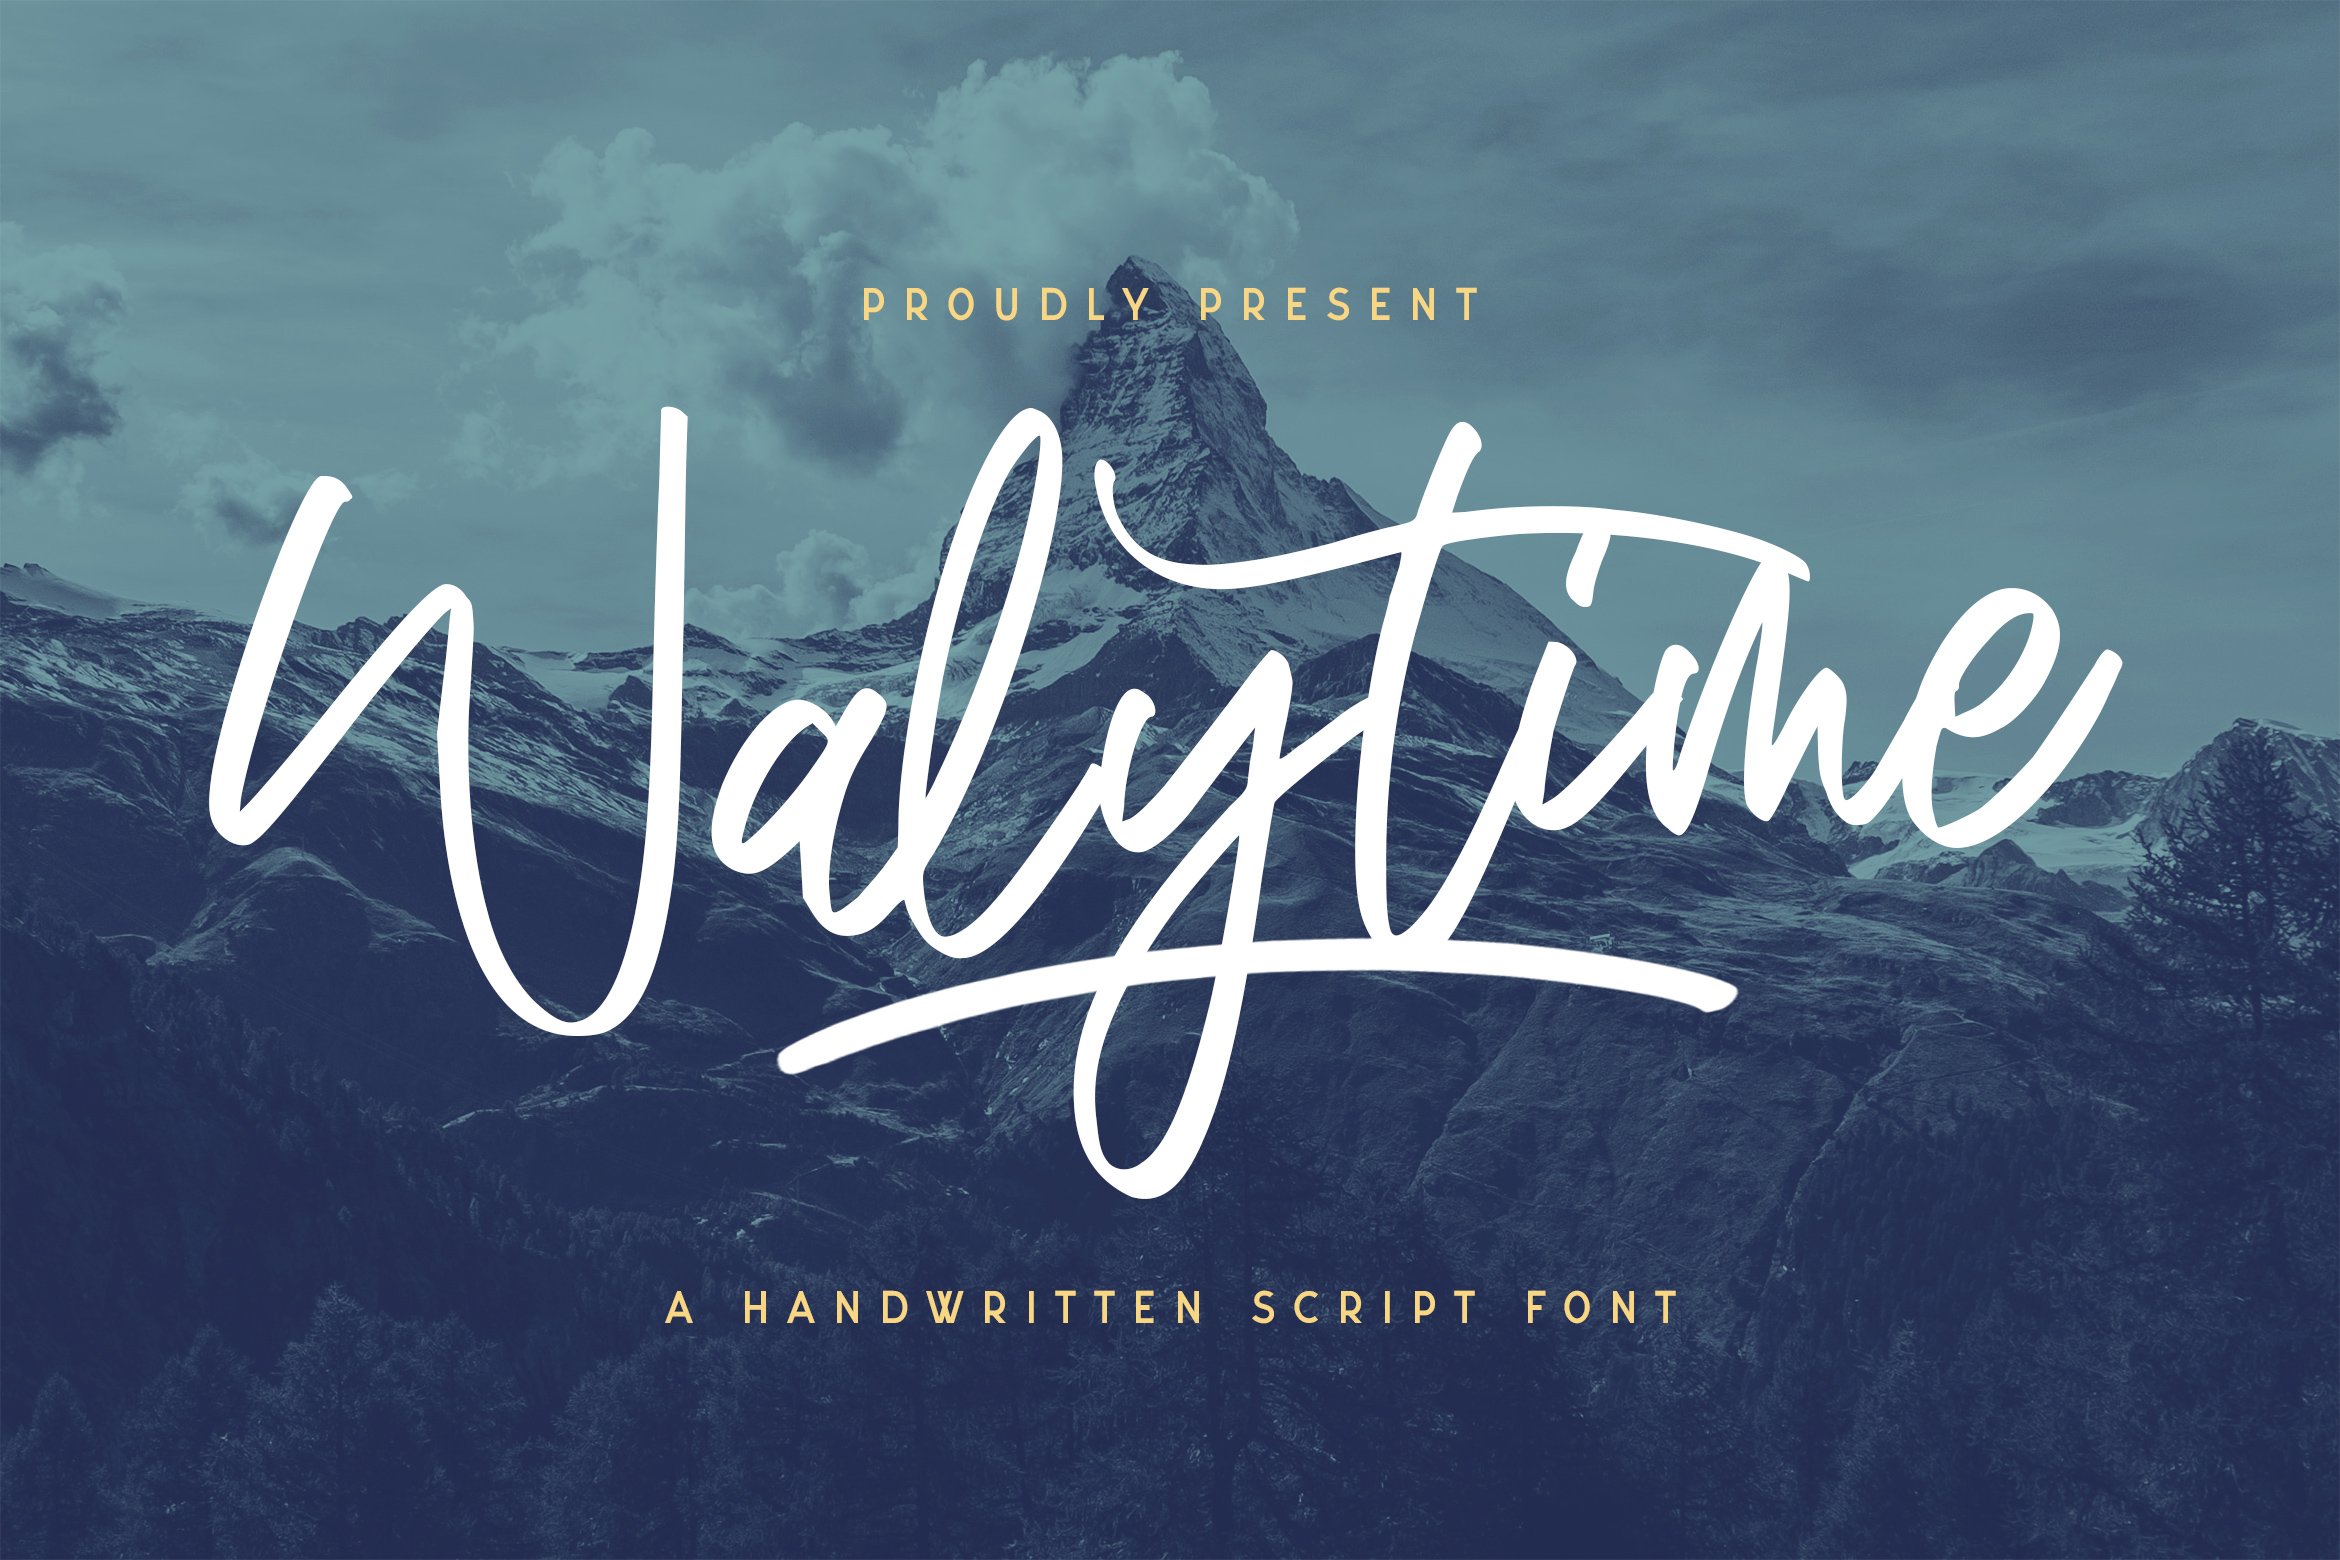 Walytime - Handwritten Font cover image.